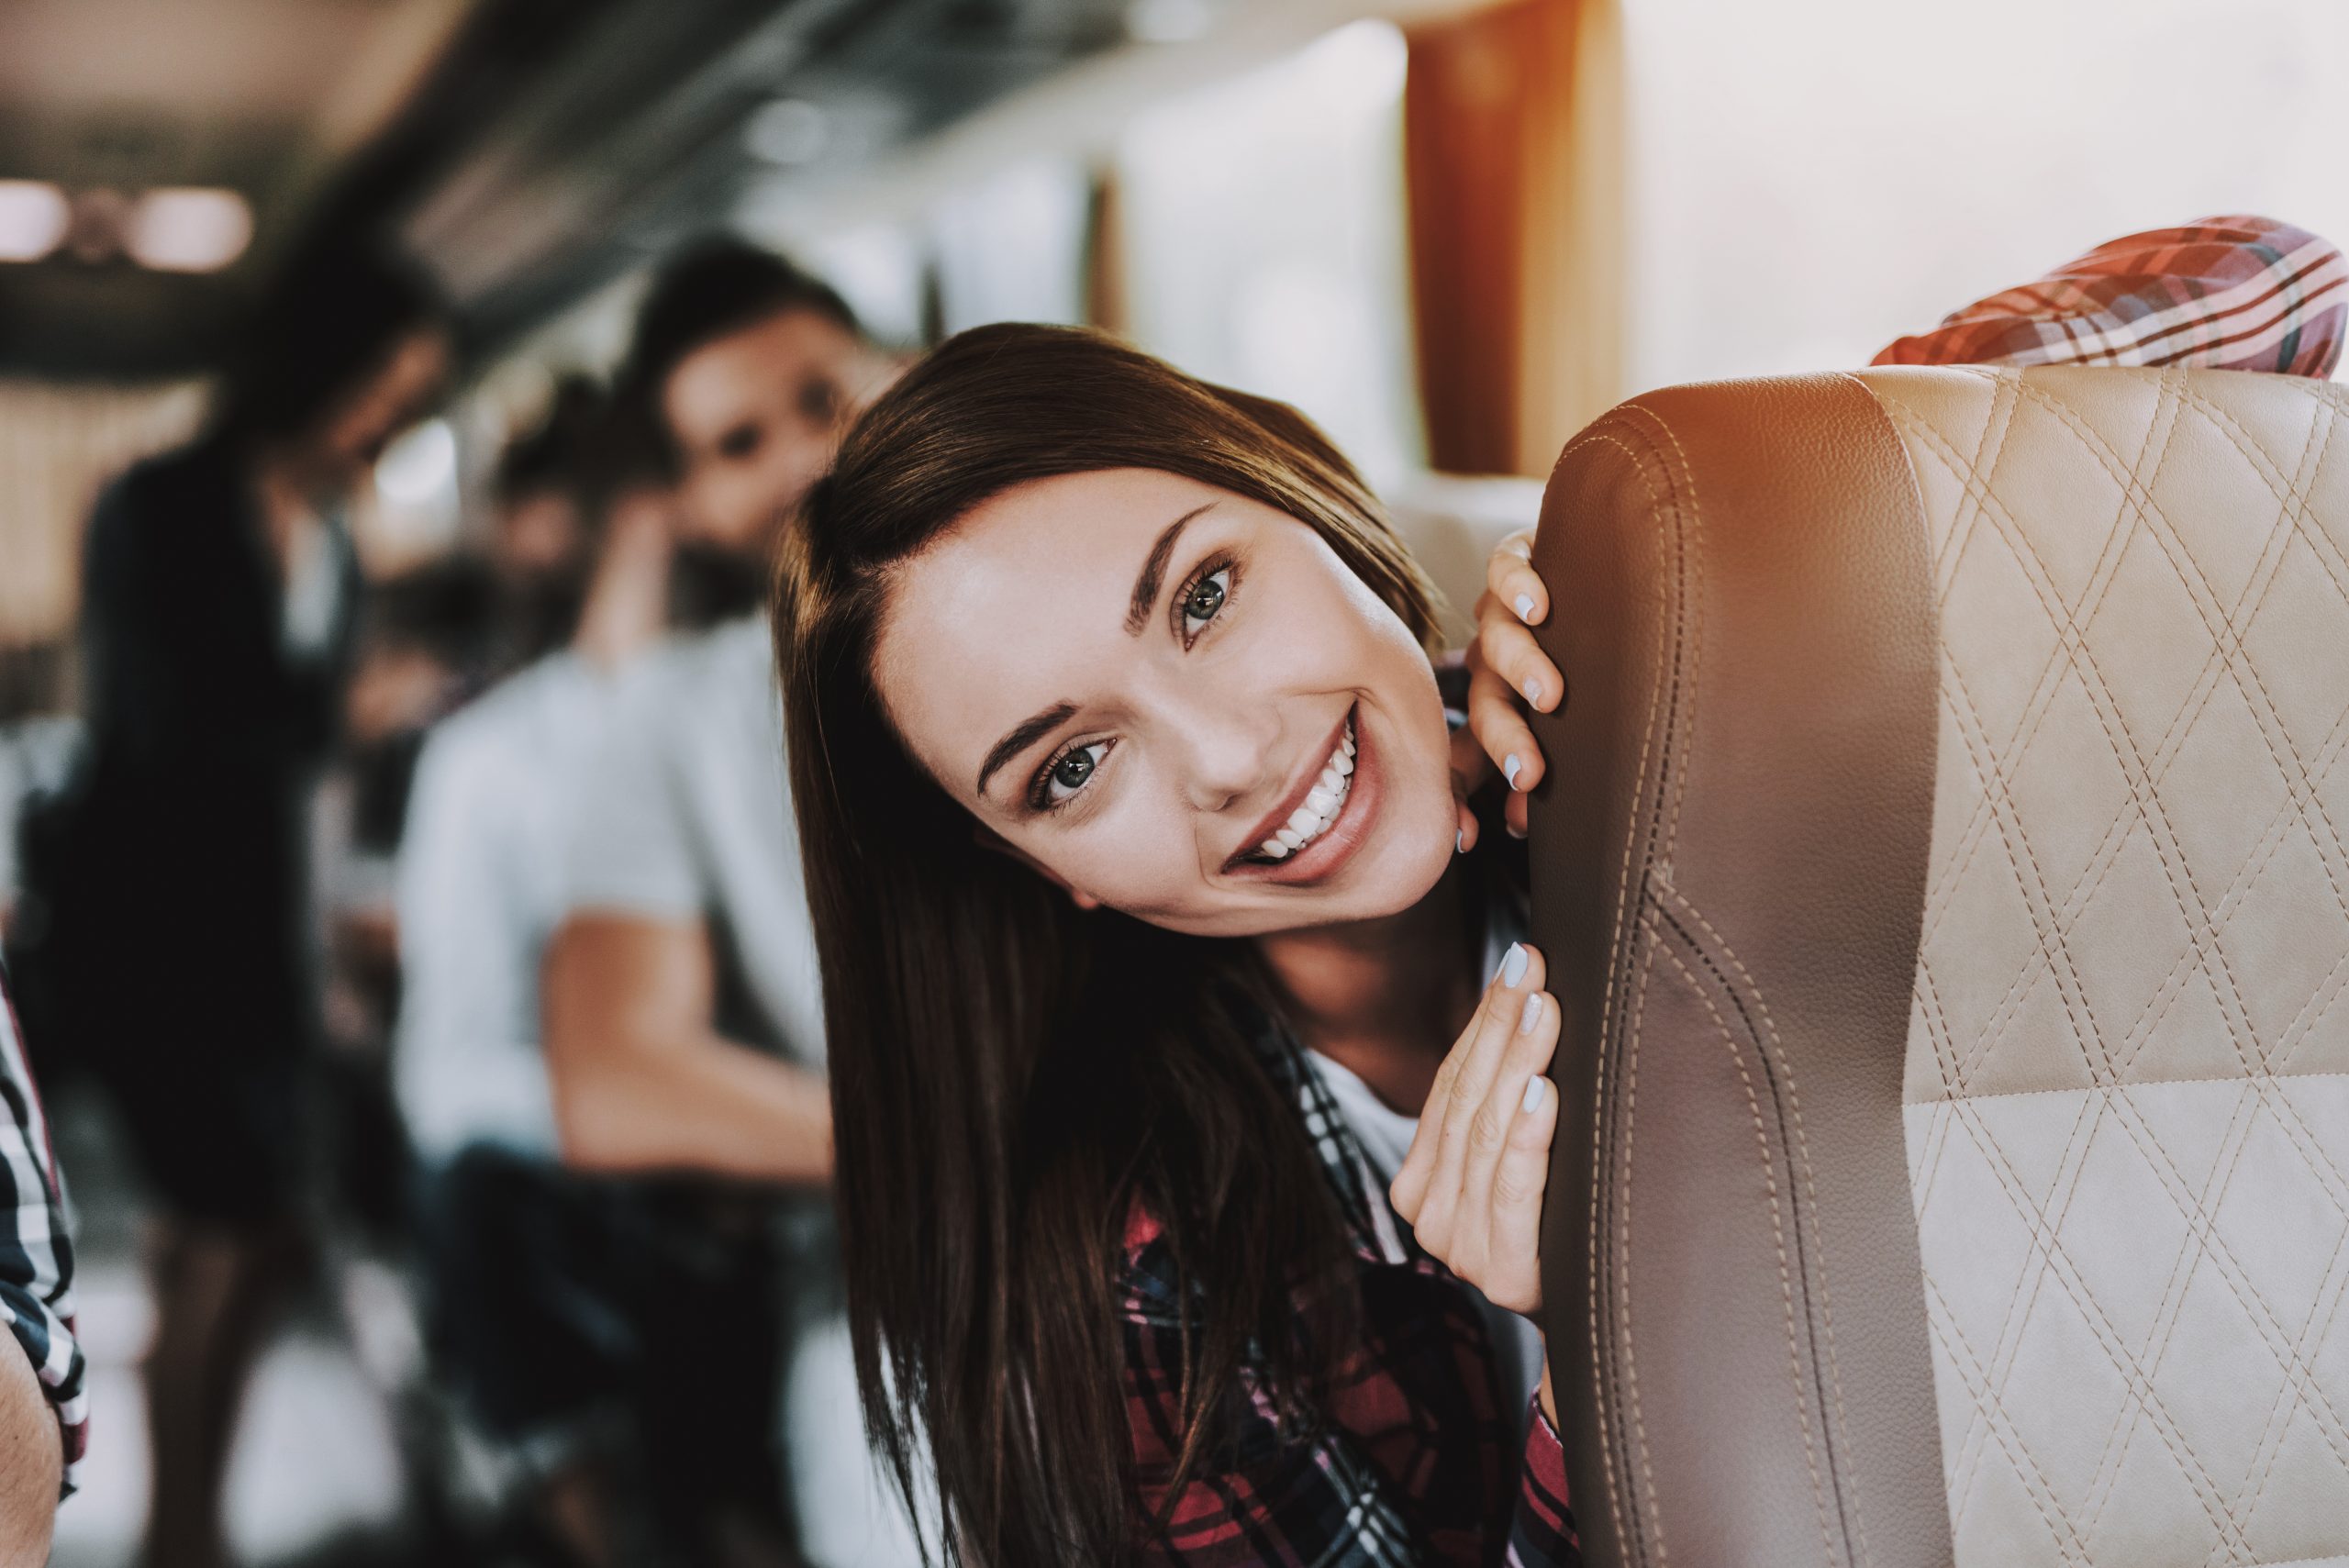 A young woman smiles while traveling by bus with friends.